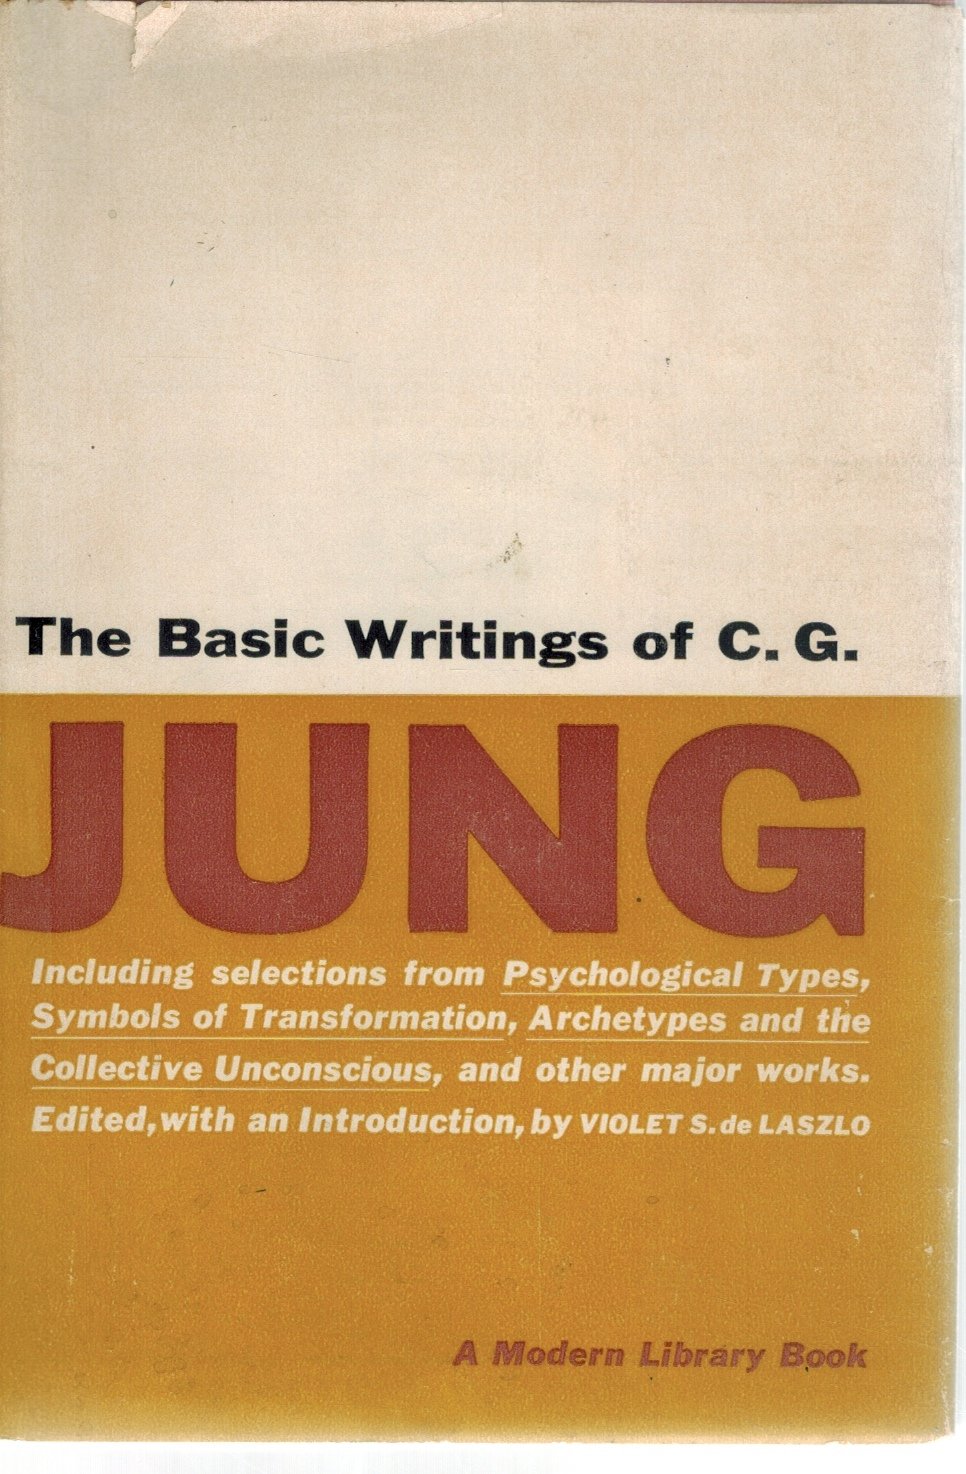 THE BASIC WRITINGS OF C. G. JUNG  by Jung, Carl Gustav